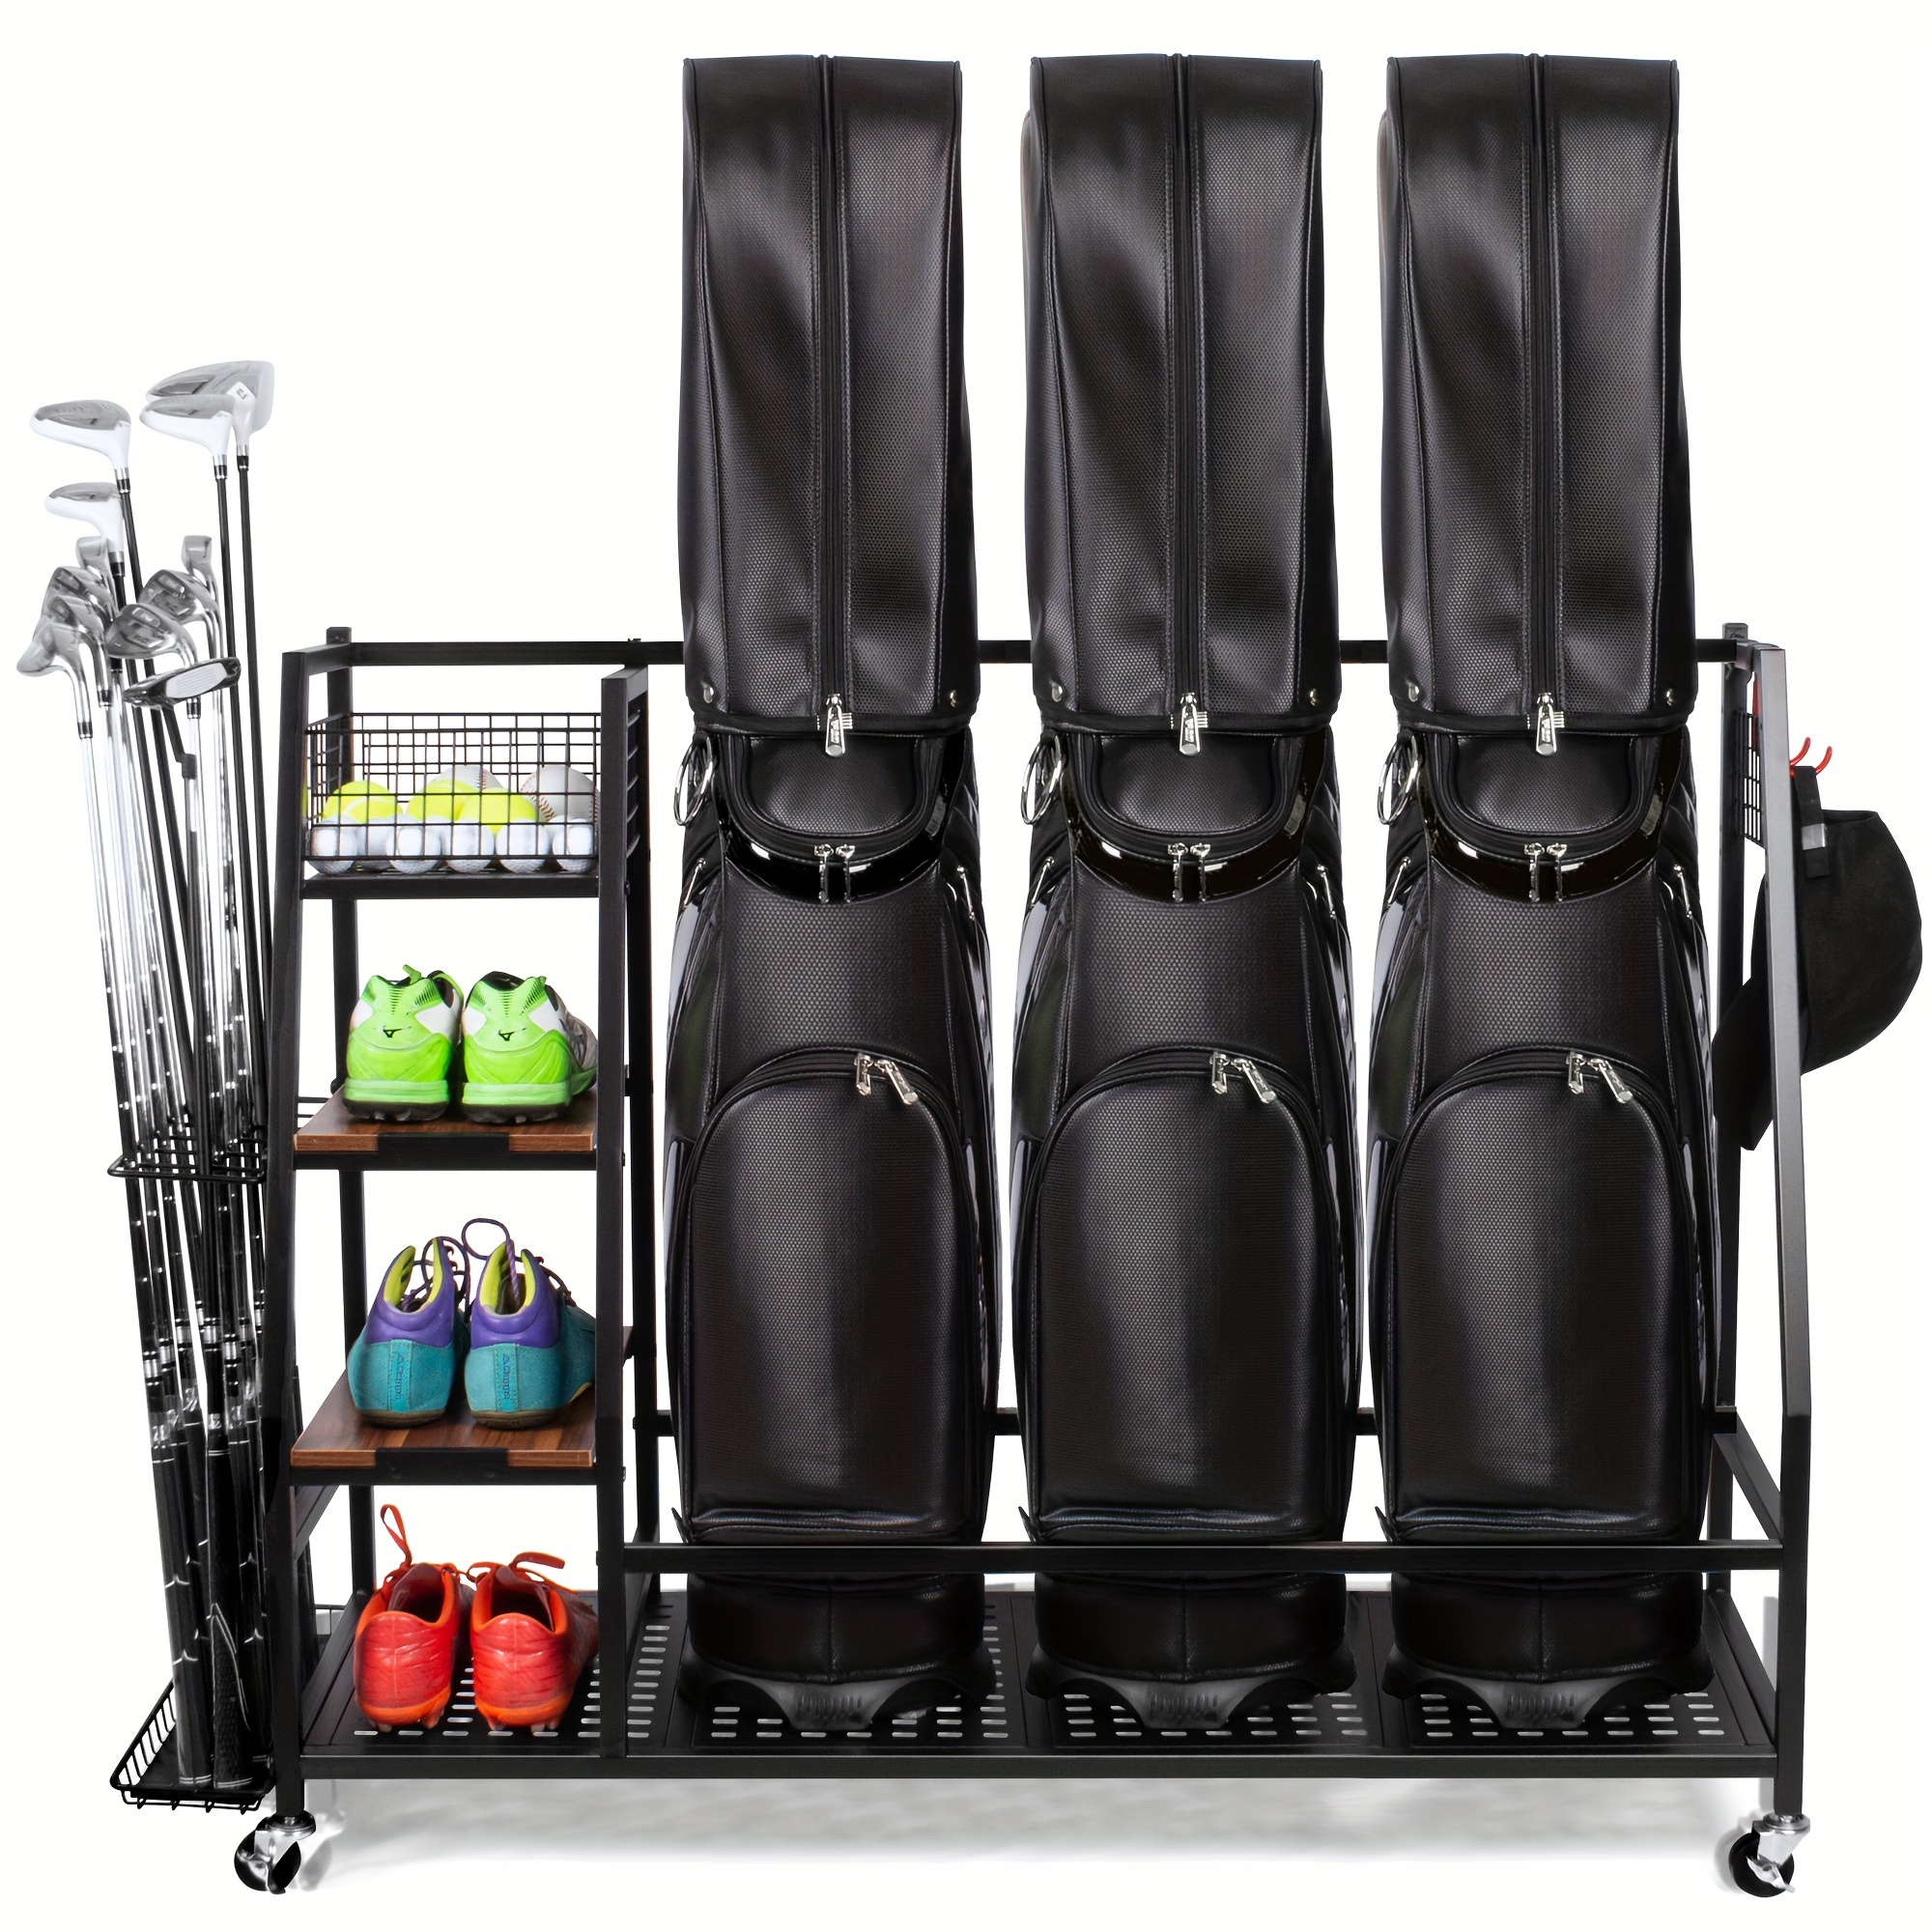 Fishing Pole Holder Fishing Rod Rack Wall Mount Wall Storage Stand Holds 6 Rods  Rod Storage Rack for Store Home Basement Accessories 